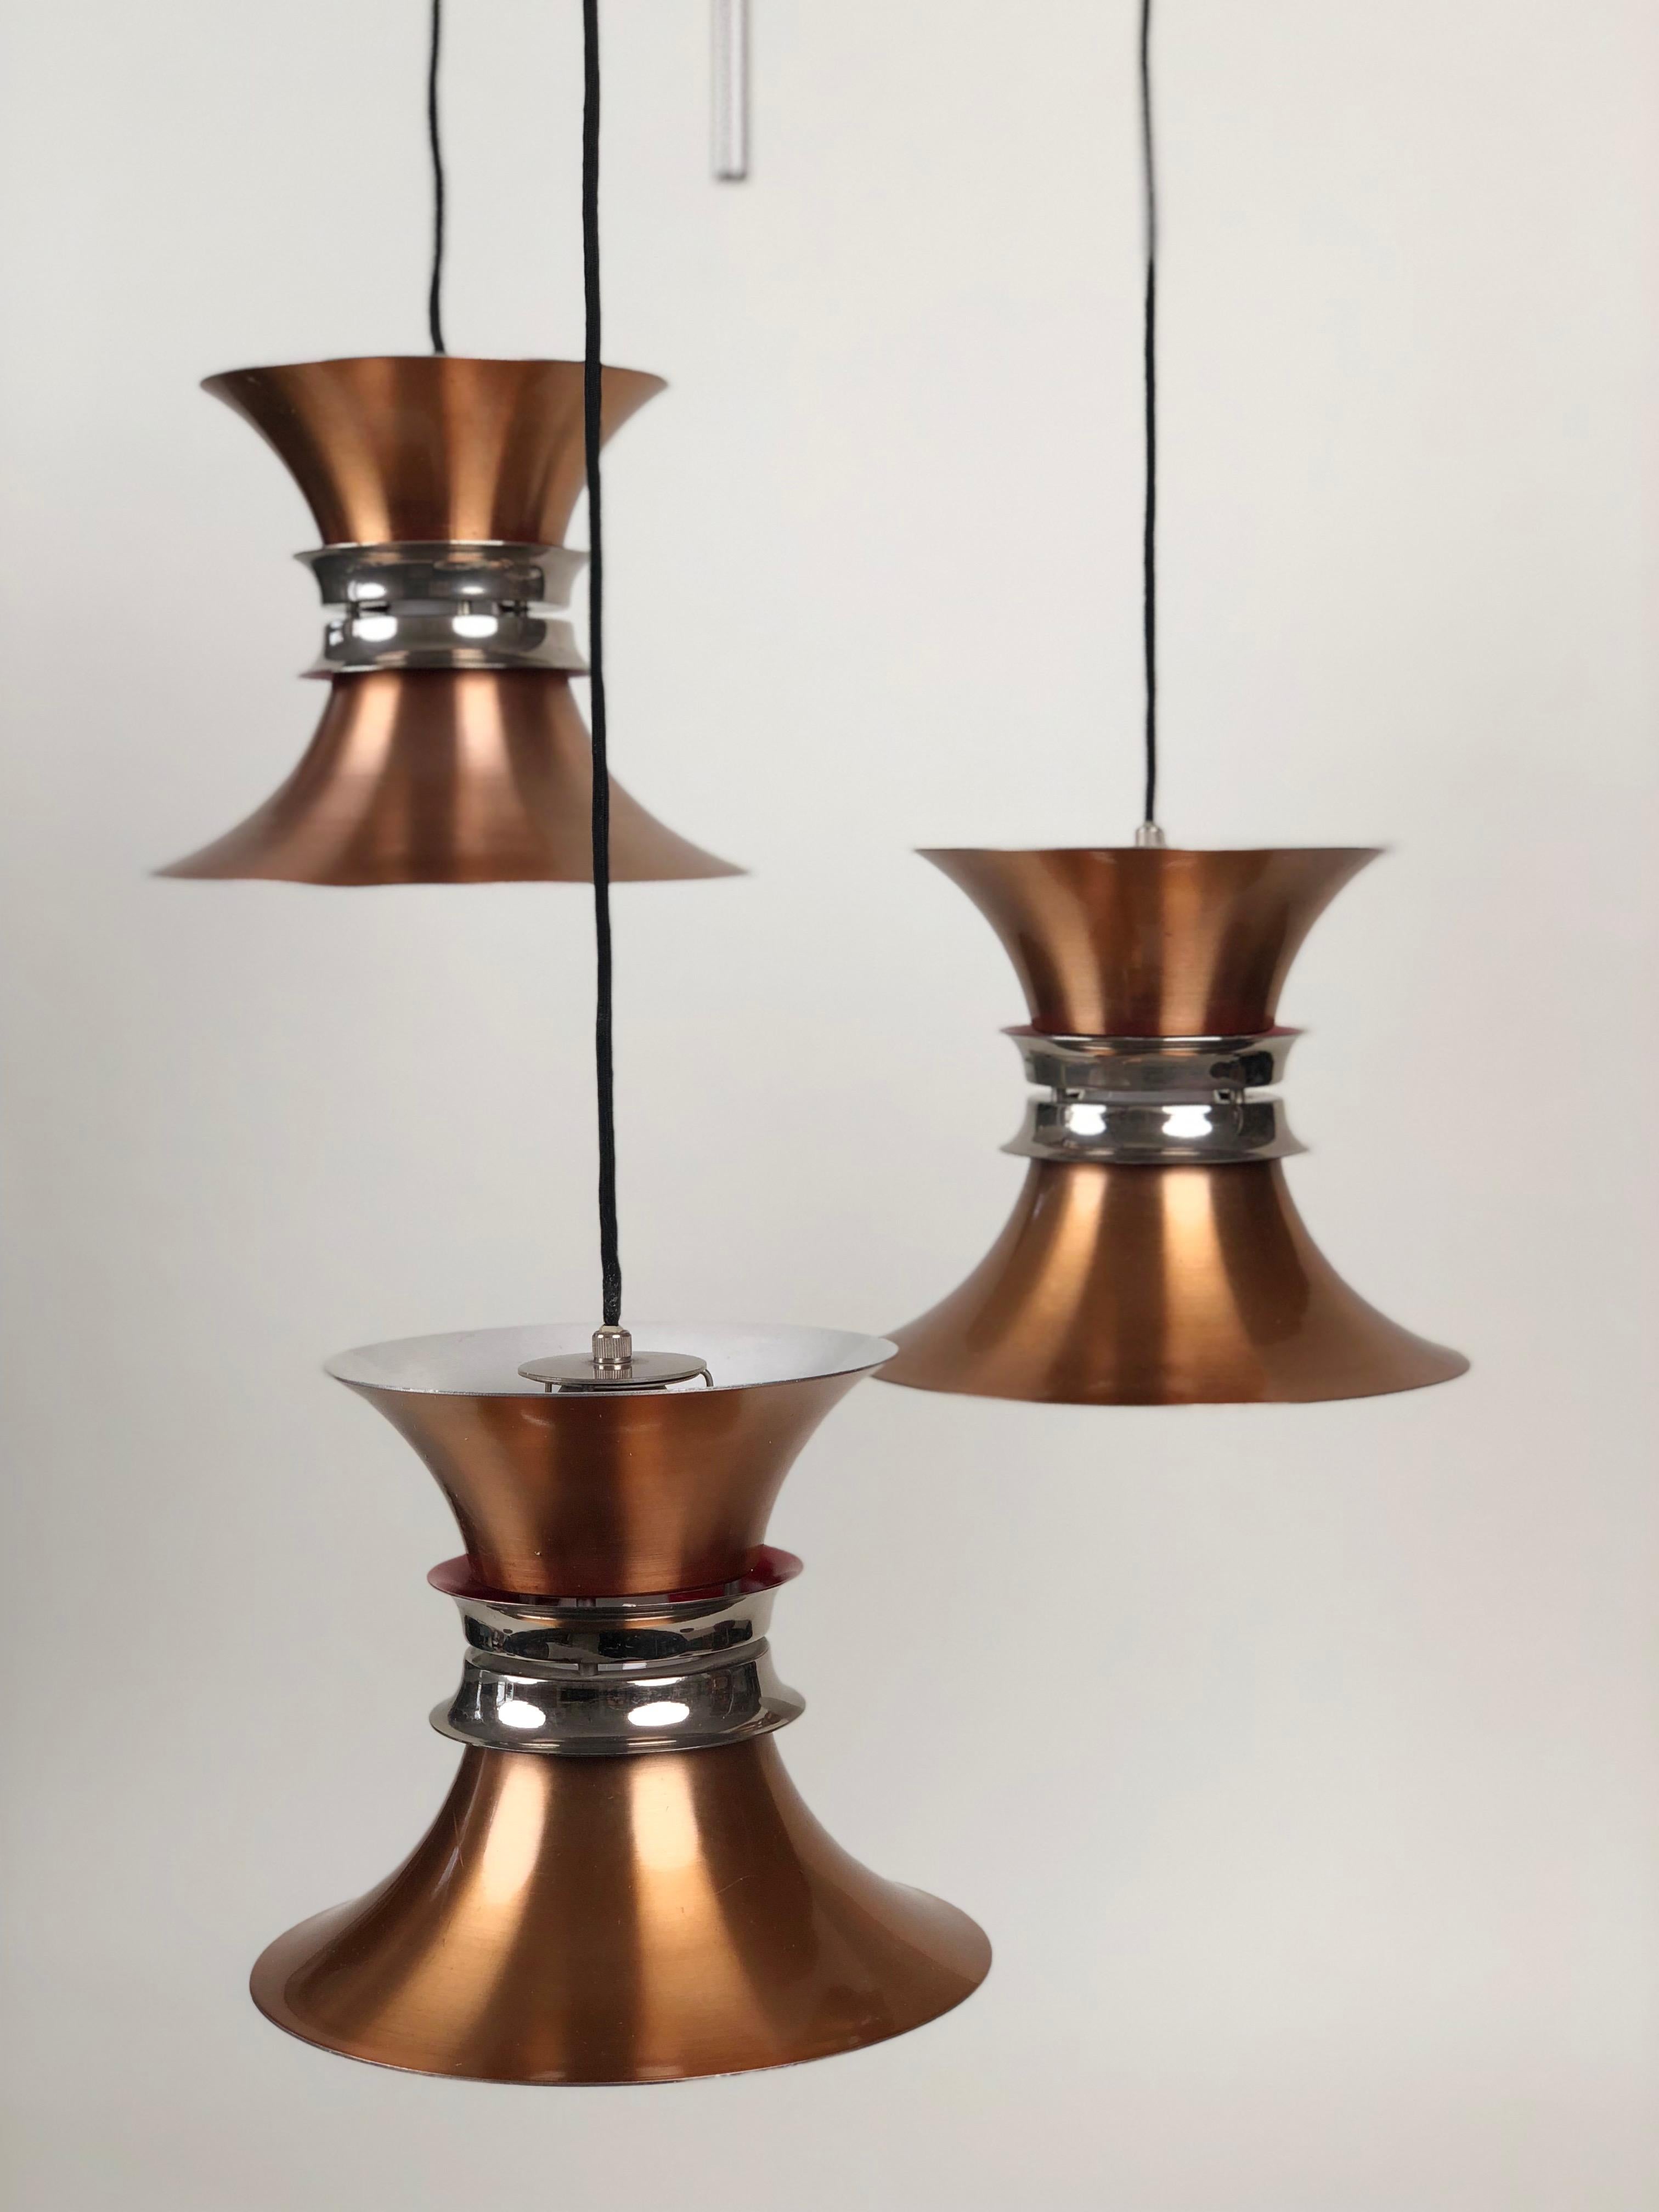 A rare three element pendant lamp designed by Carl Thore for Granhaga Metallindustri. This example is part of the Trava series.
It consists of three lamps, each composed of stacked elements in anodized copper, with white reflected surface, then two